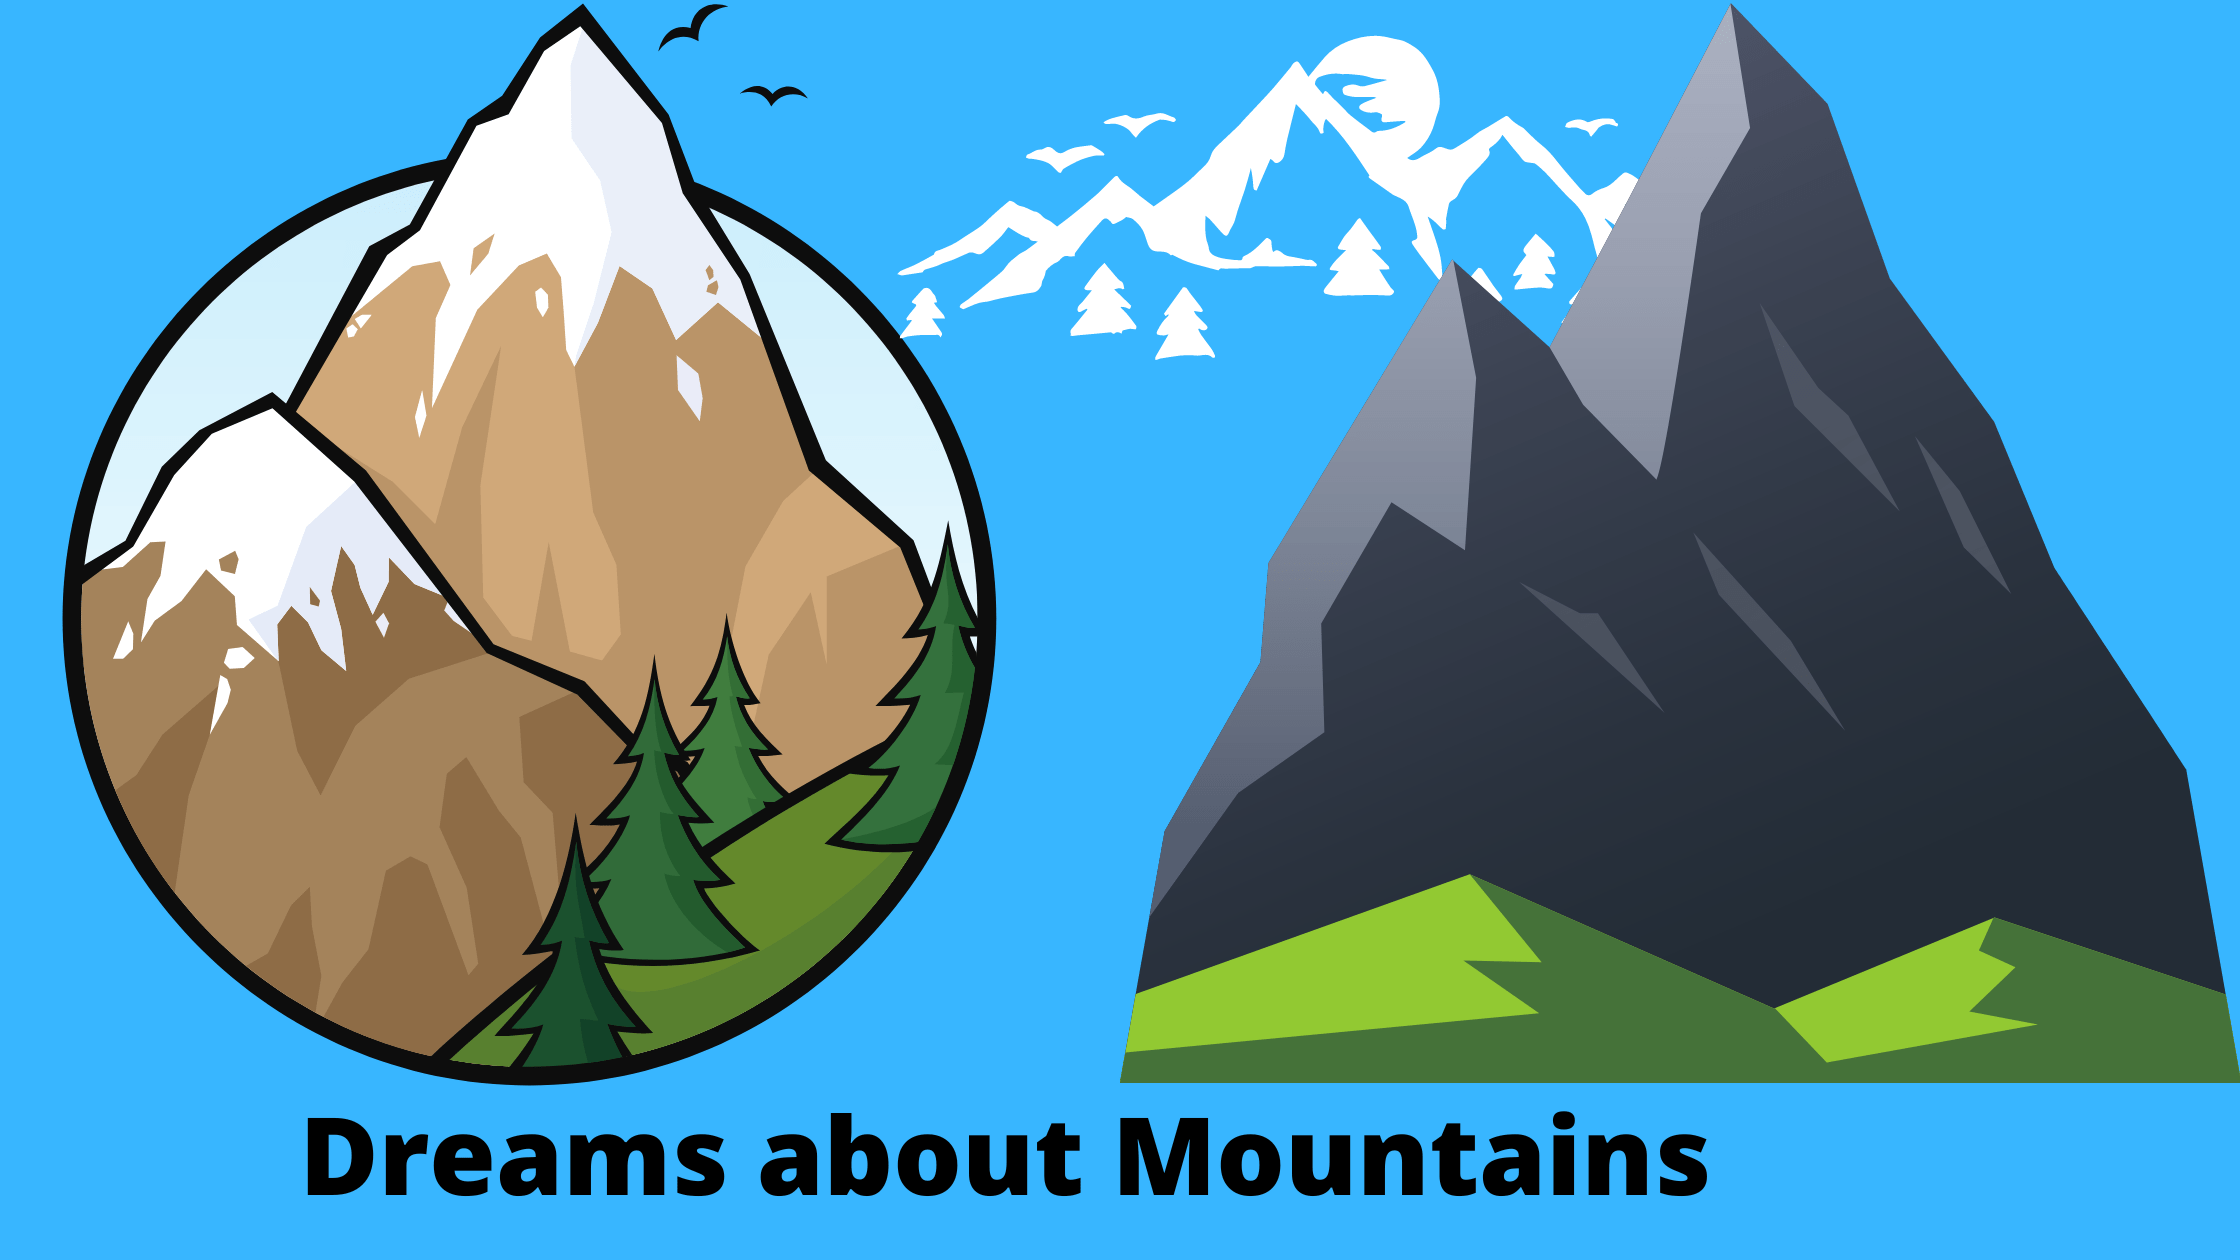 DDeaming about Mountains